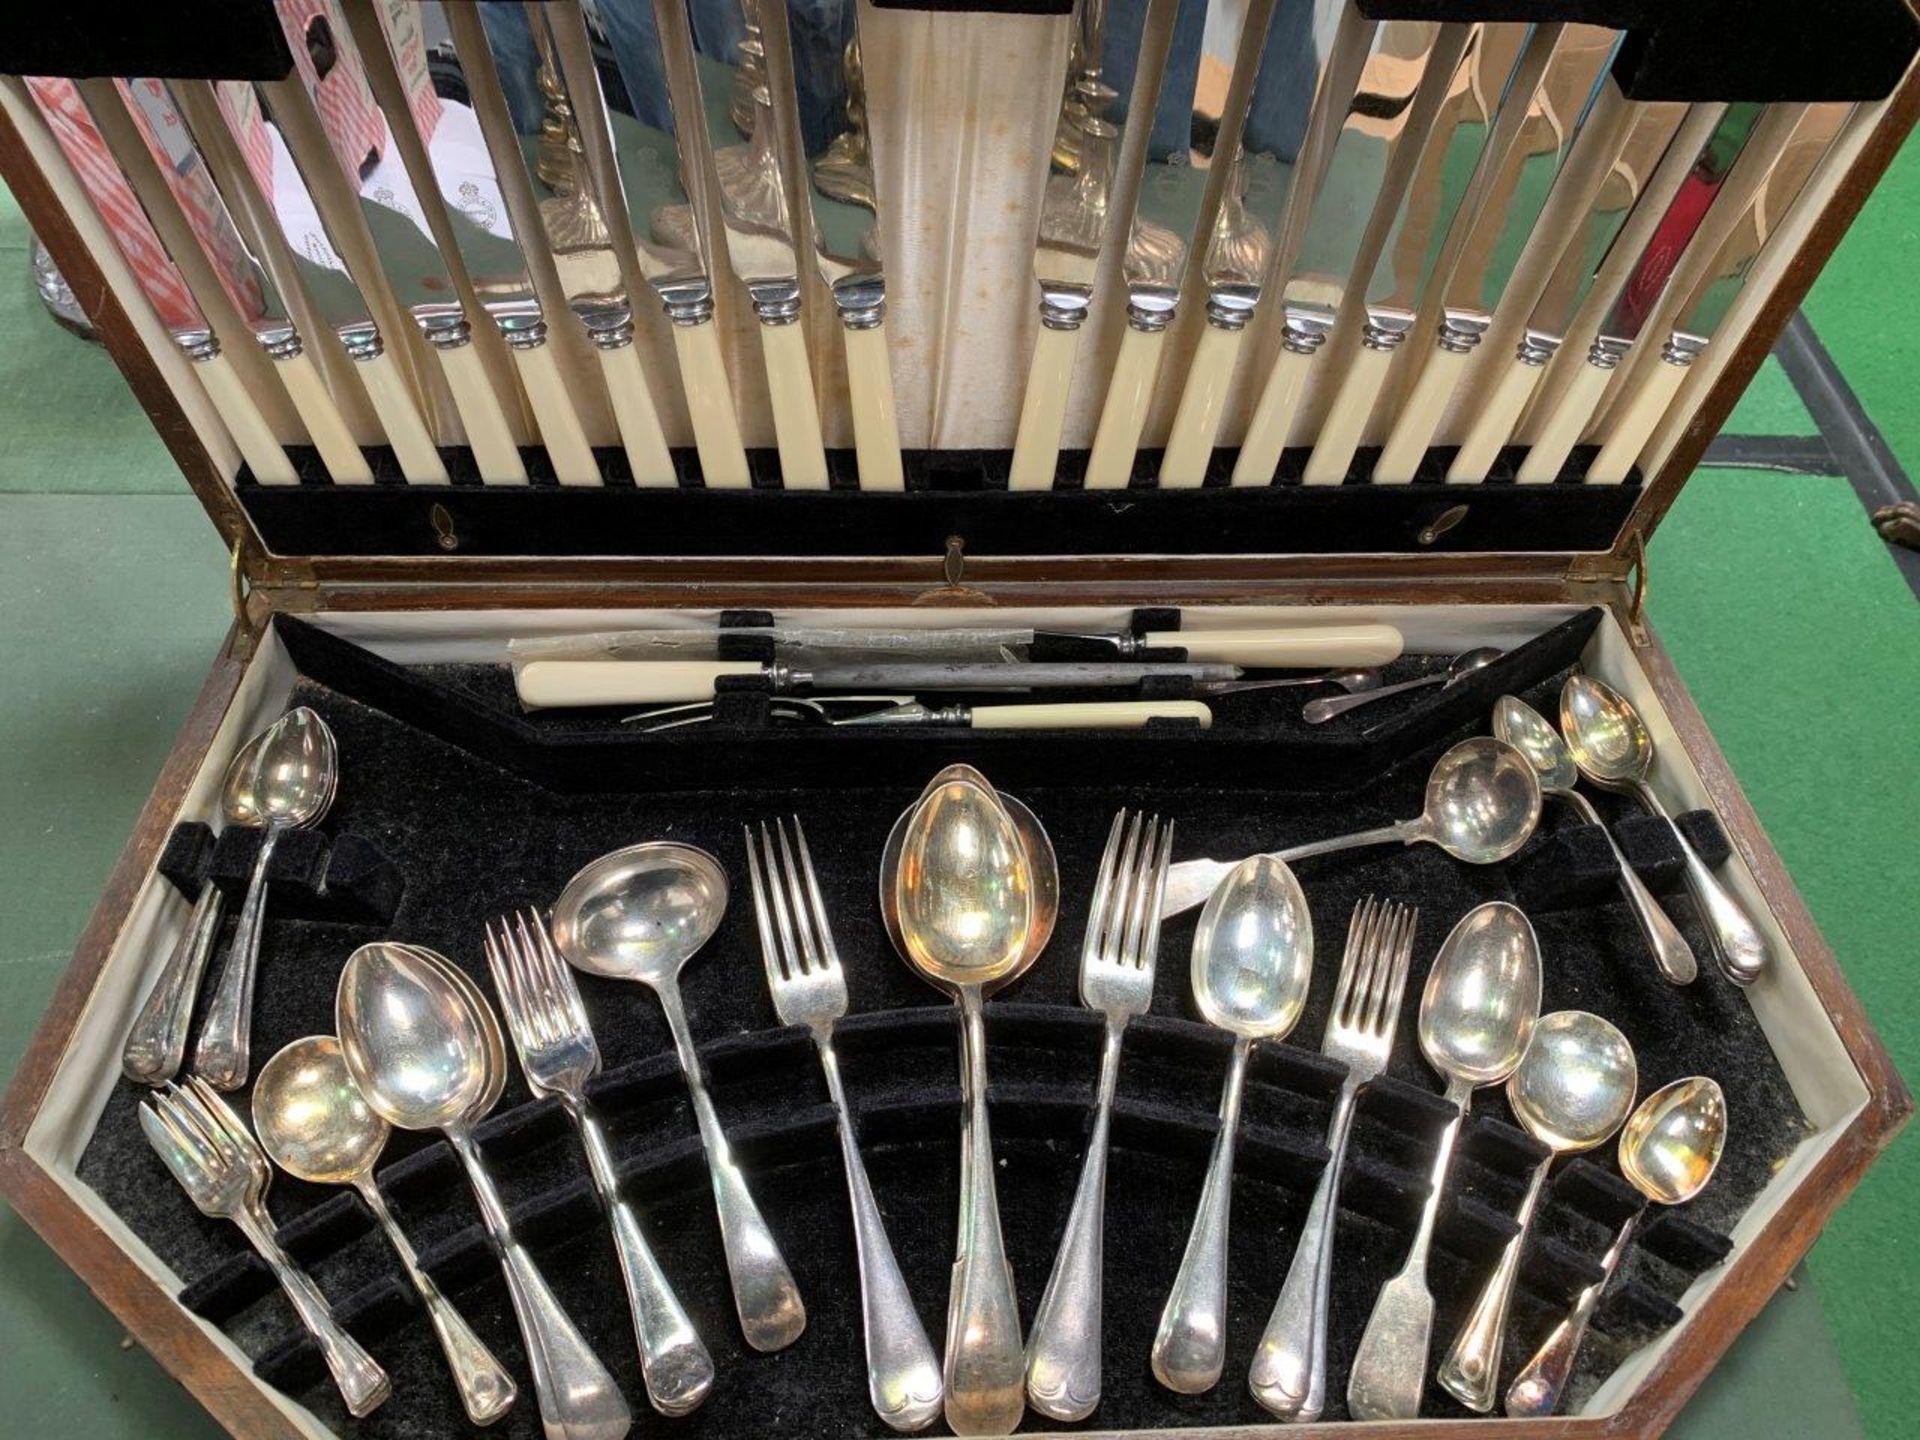 Canteen of silver plated cutlery, six plate settings, part set.